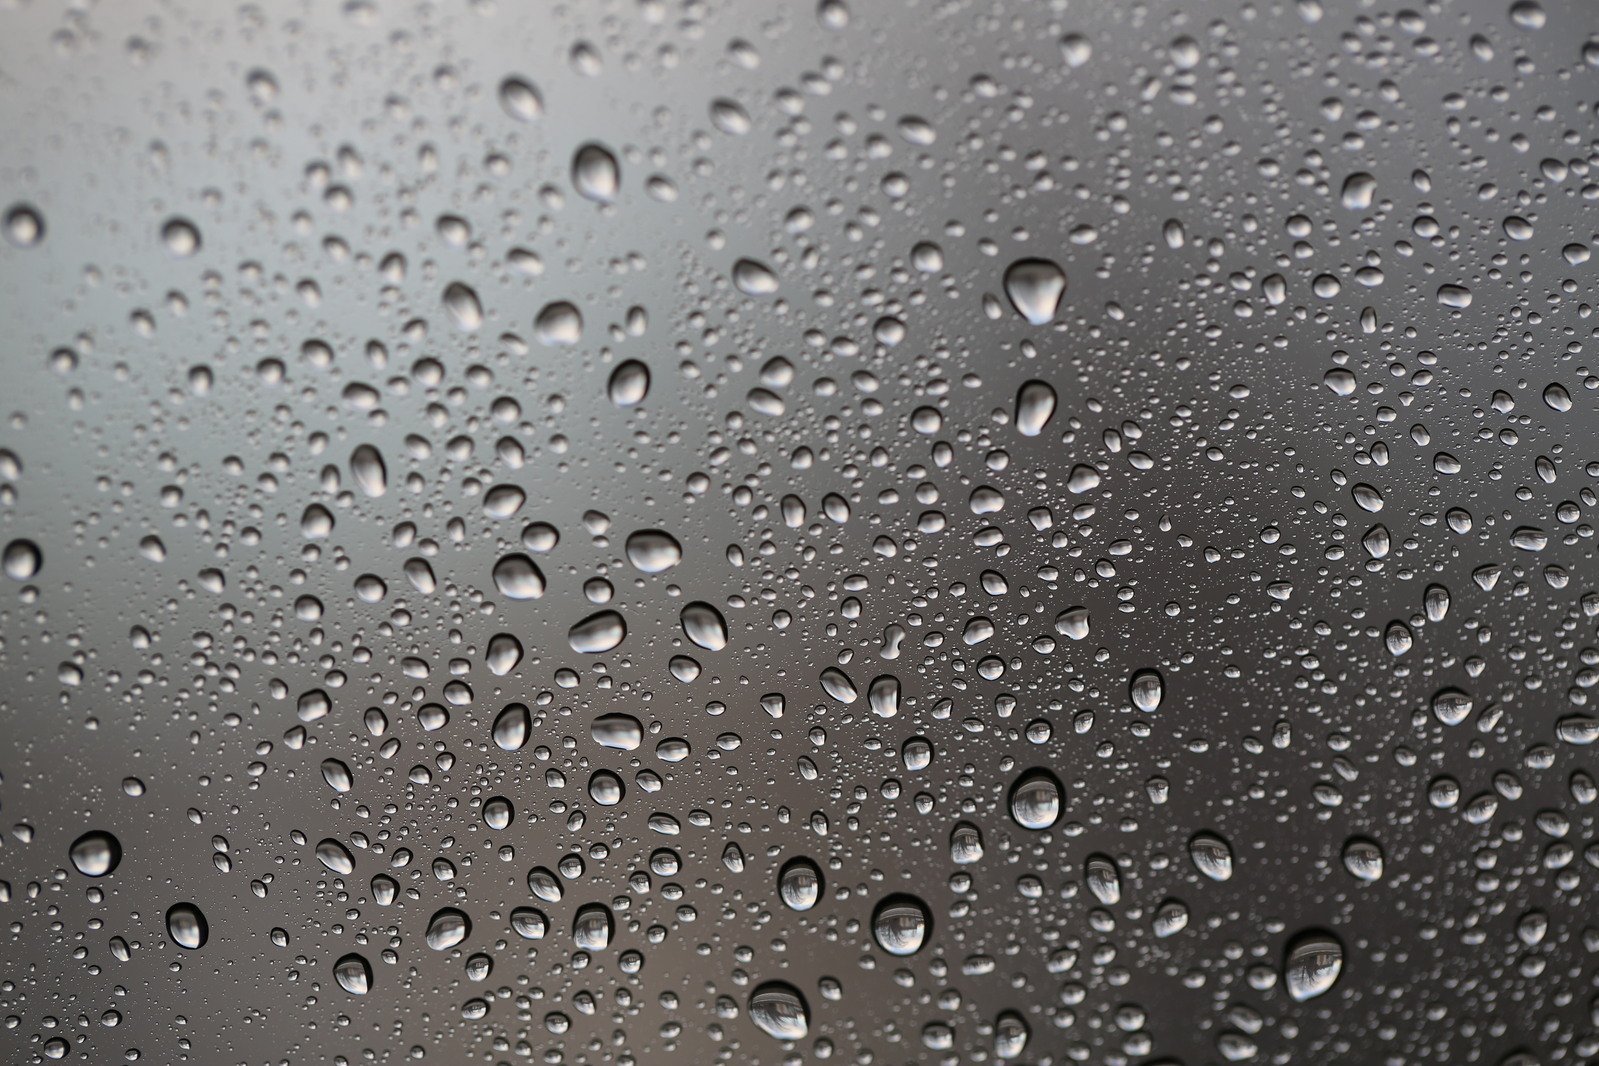 rain drops are on the surface of the window